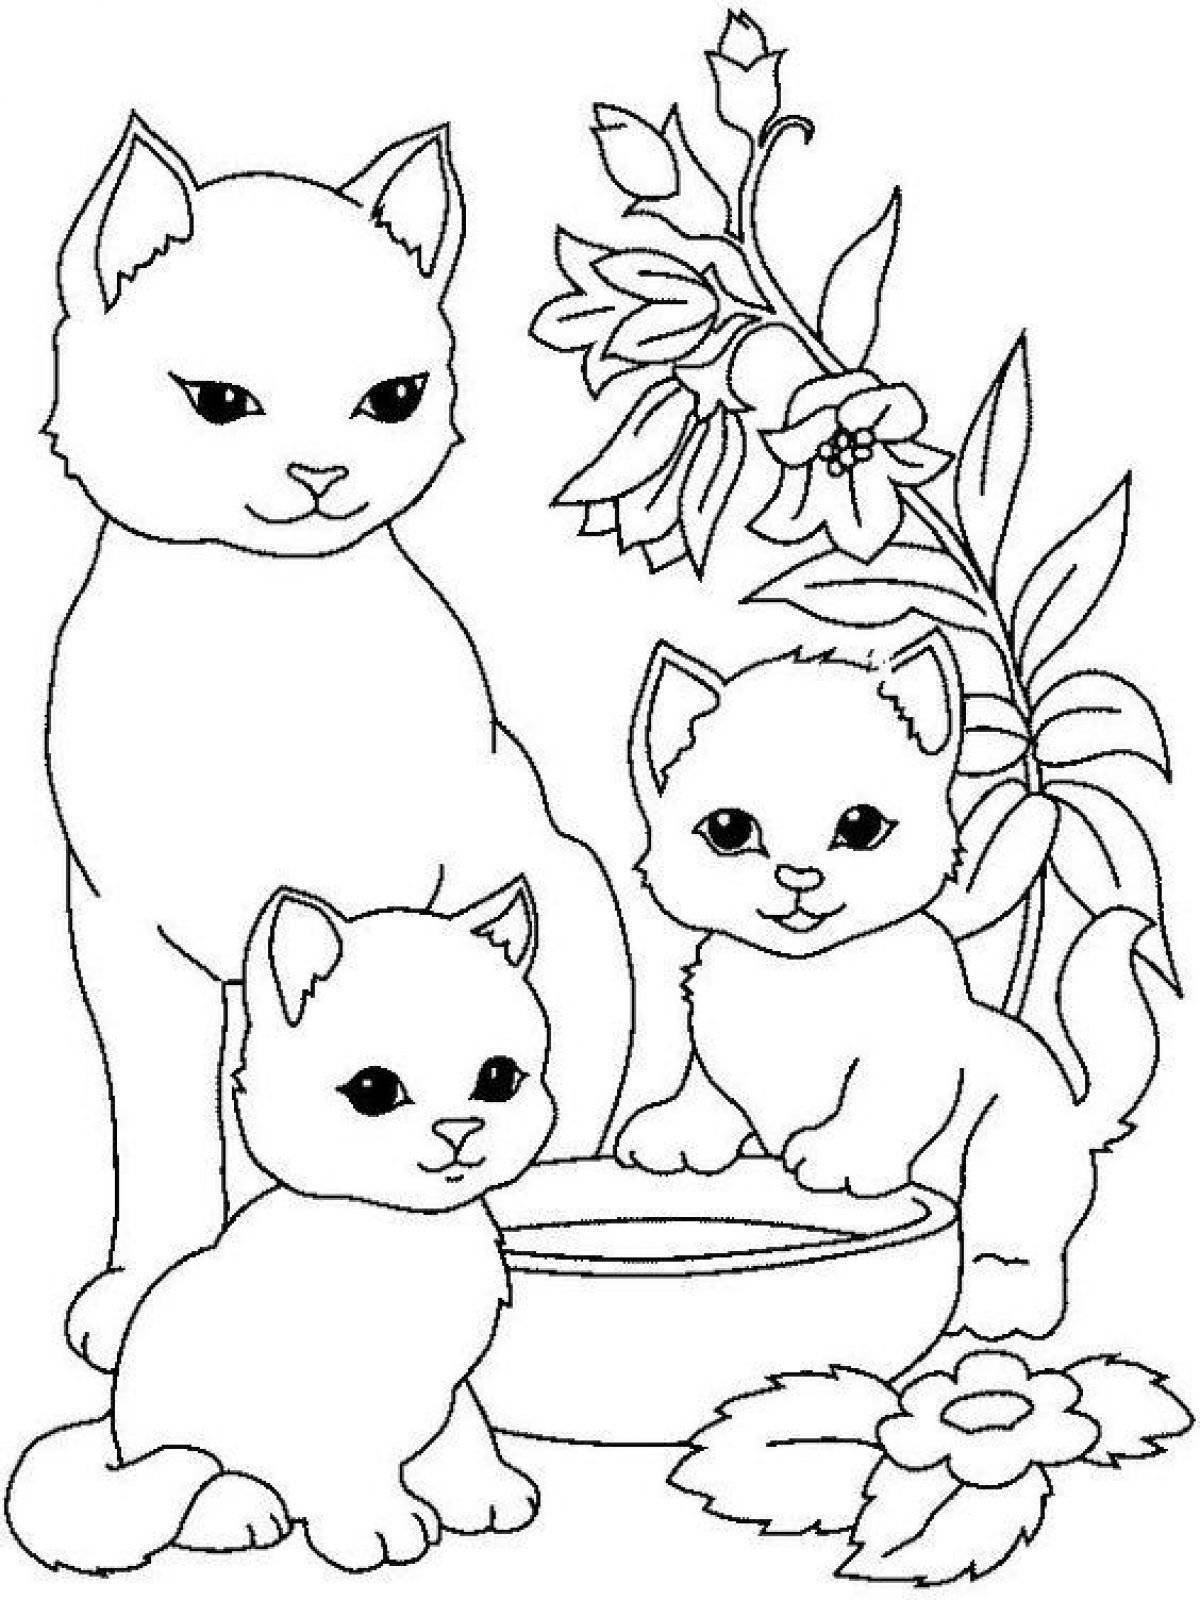 Amazing coloring pages for 12 year old girls with cute cats